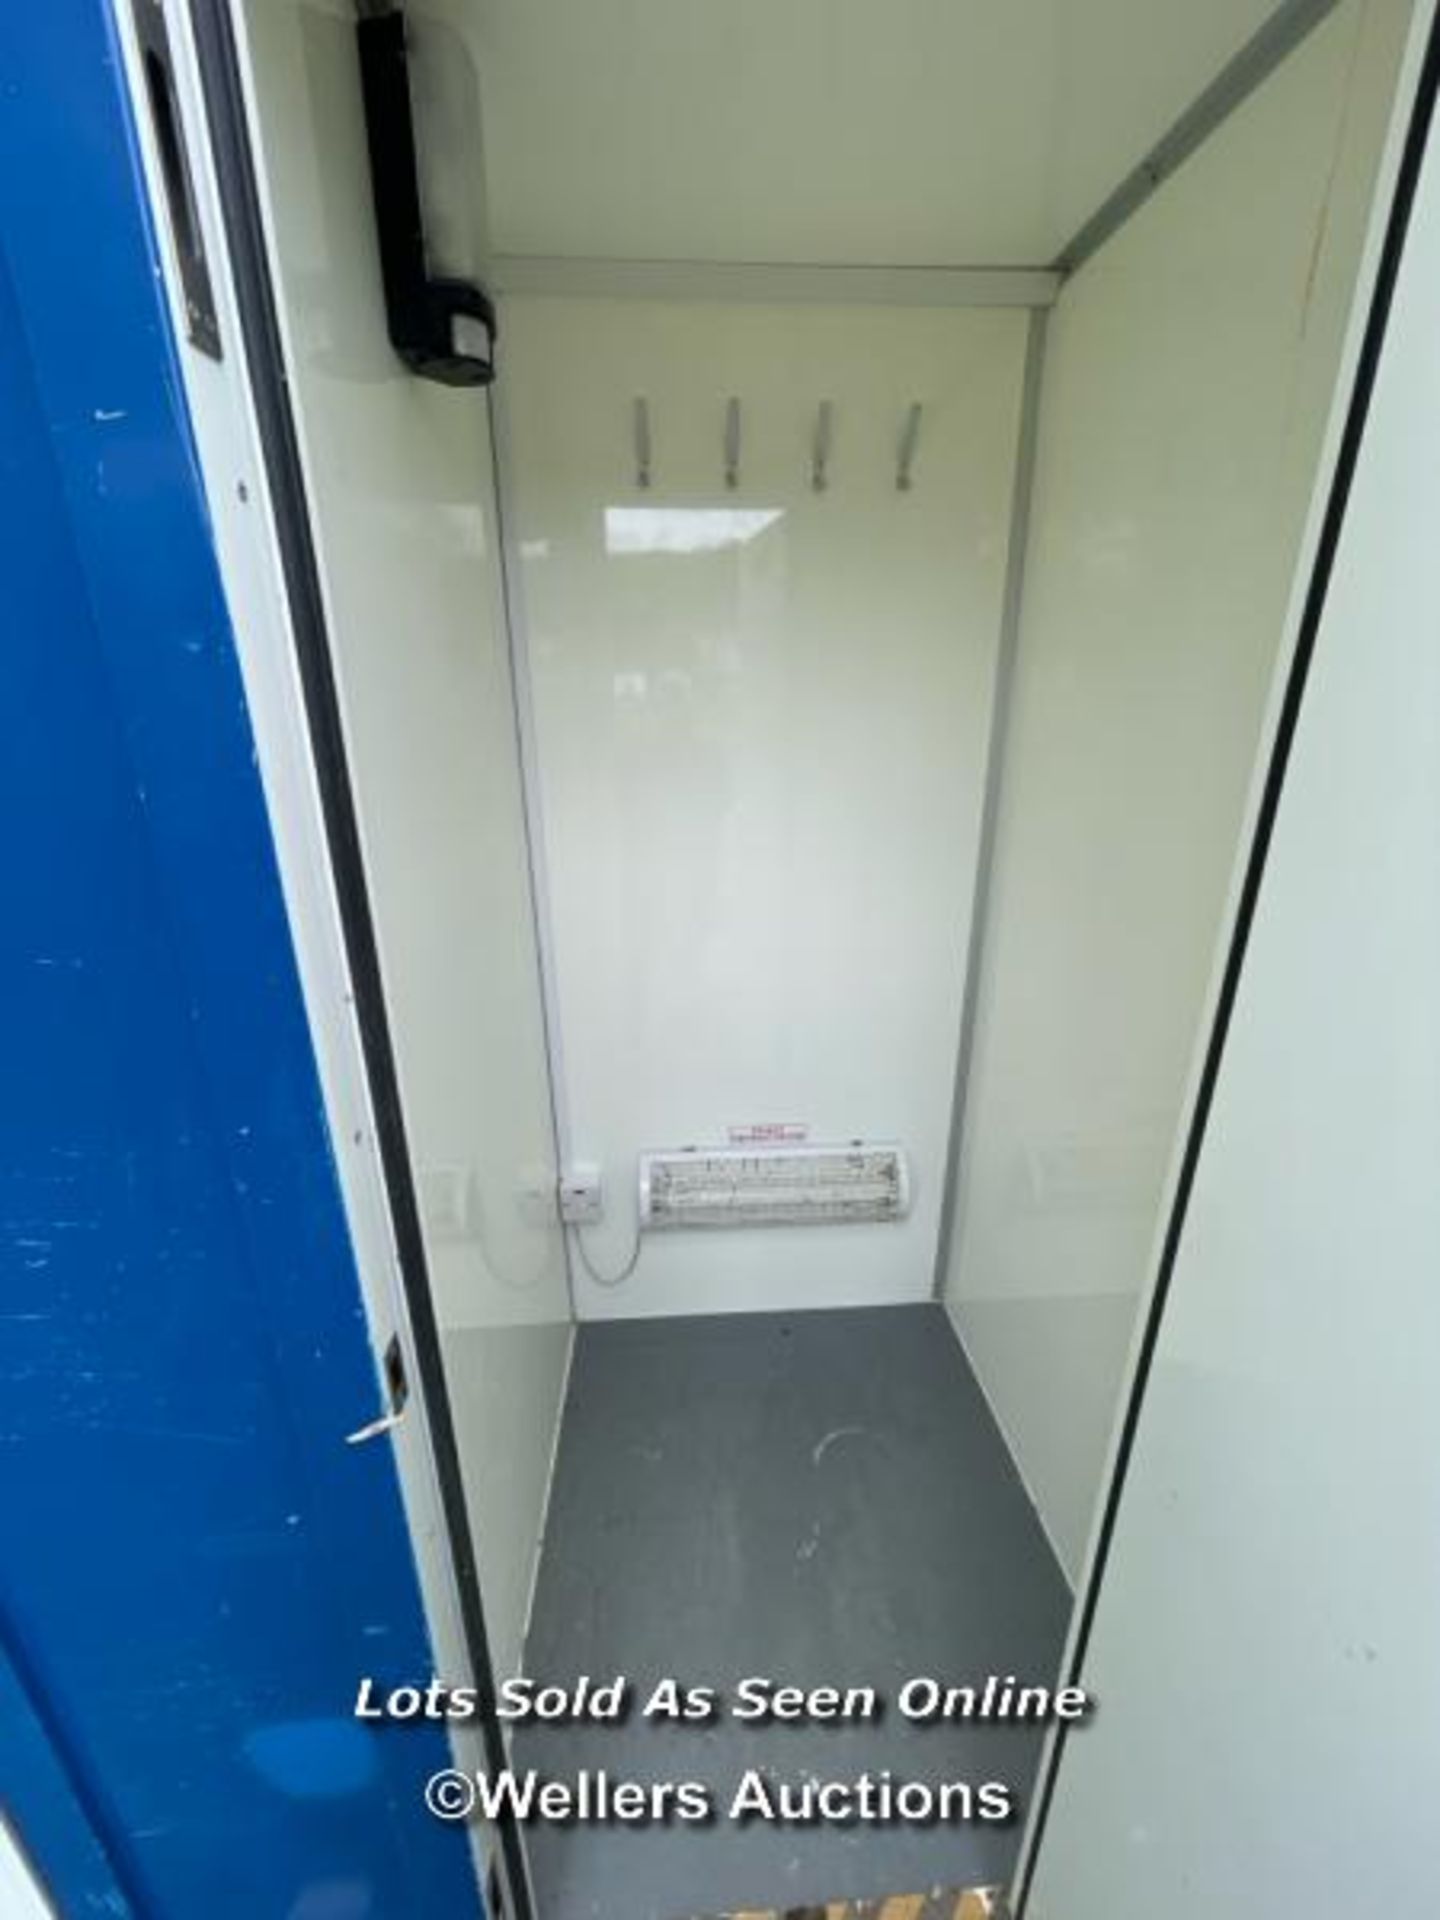 6 PERSON 12 X 7.5FT AJC EASY CABIN TOWABLE WELFARE UNIT, INCLUDES WASH BASIN, KETTLE, MICROWAVE, - Image 11 of 19